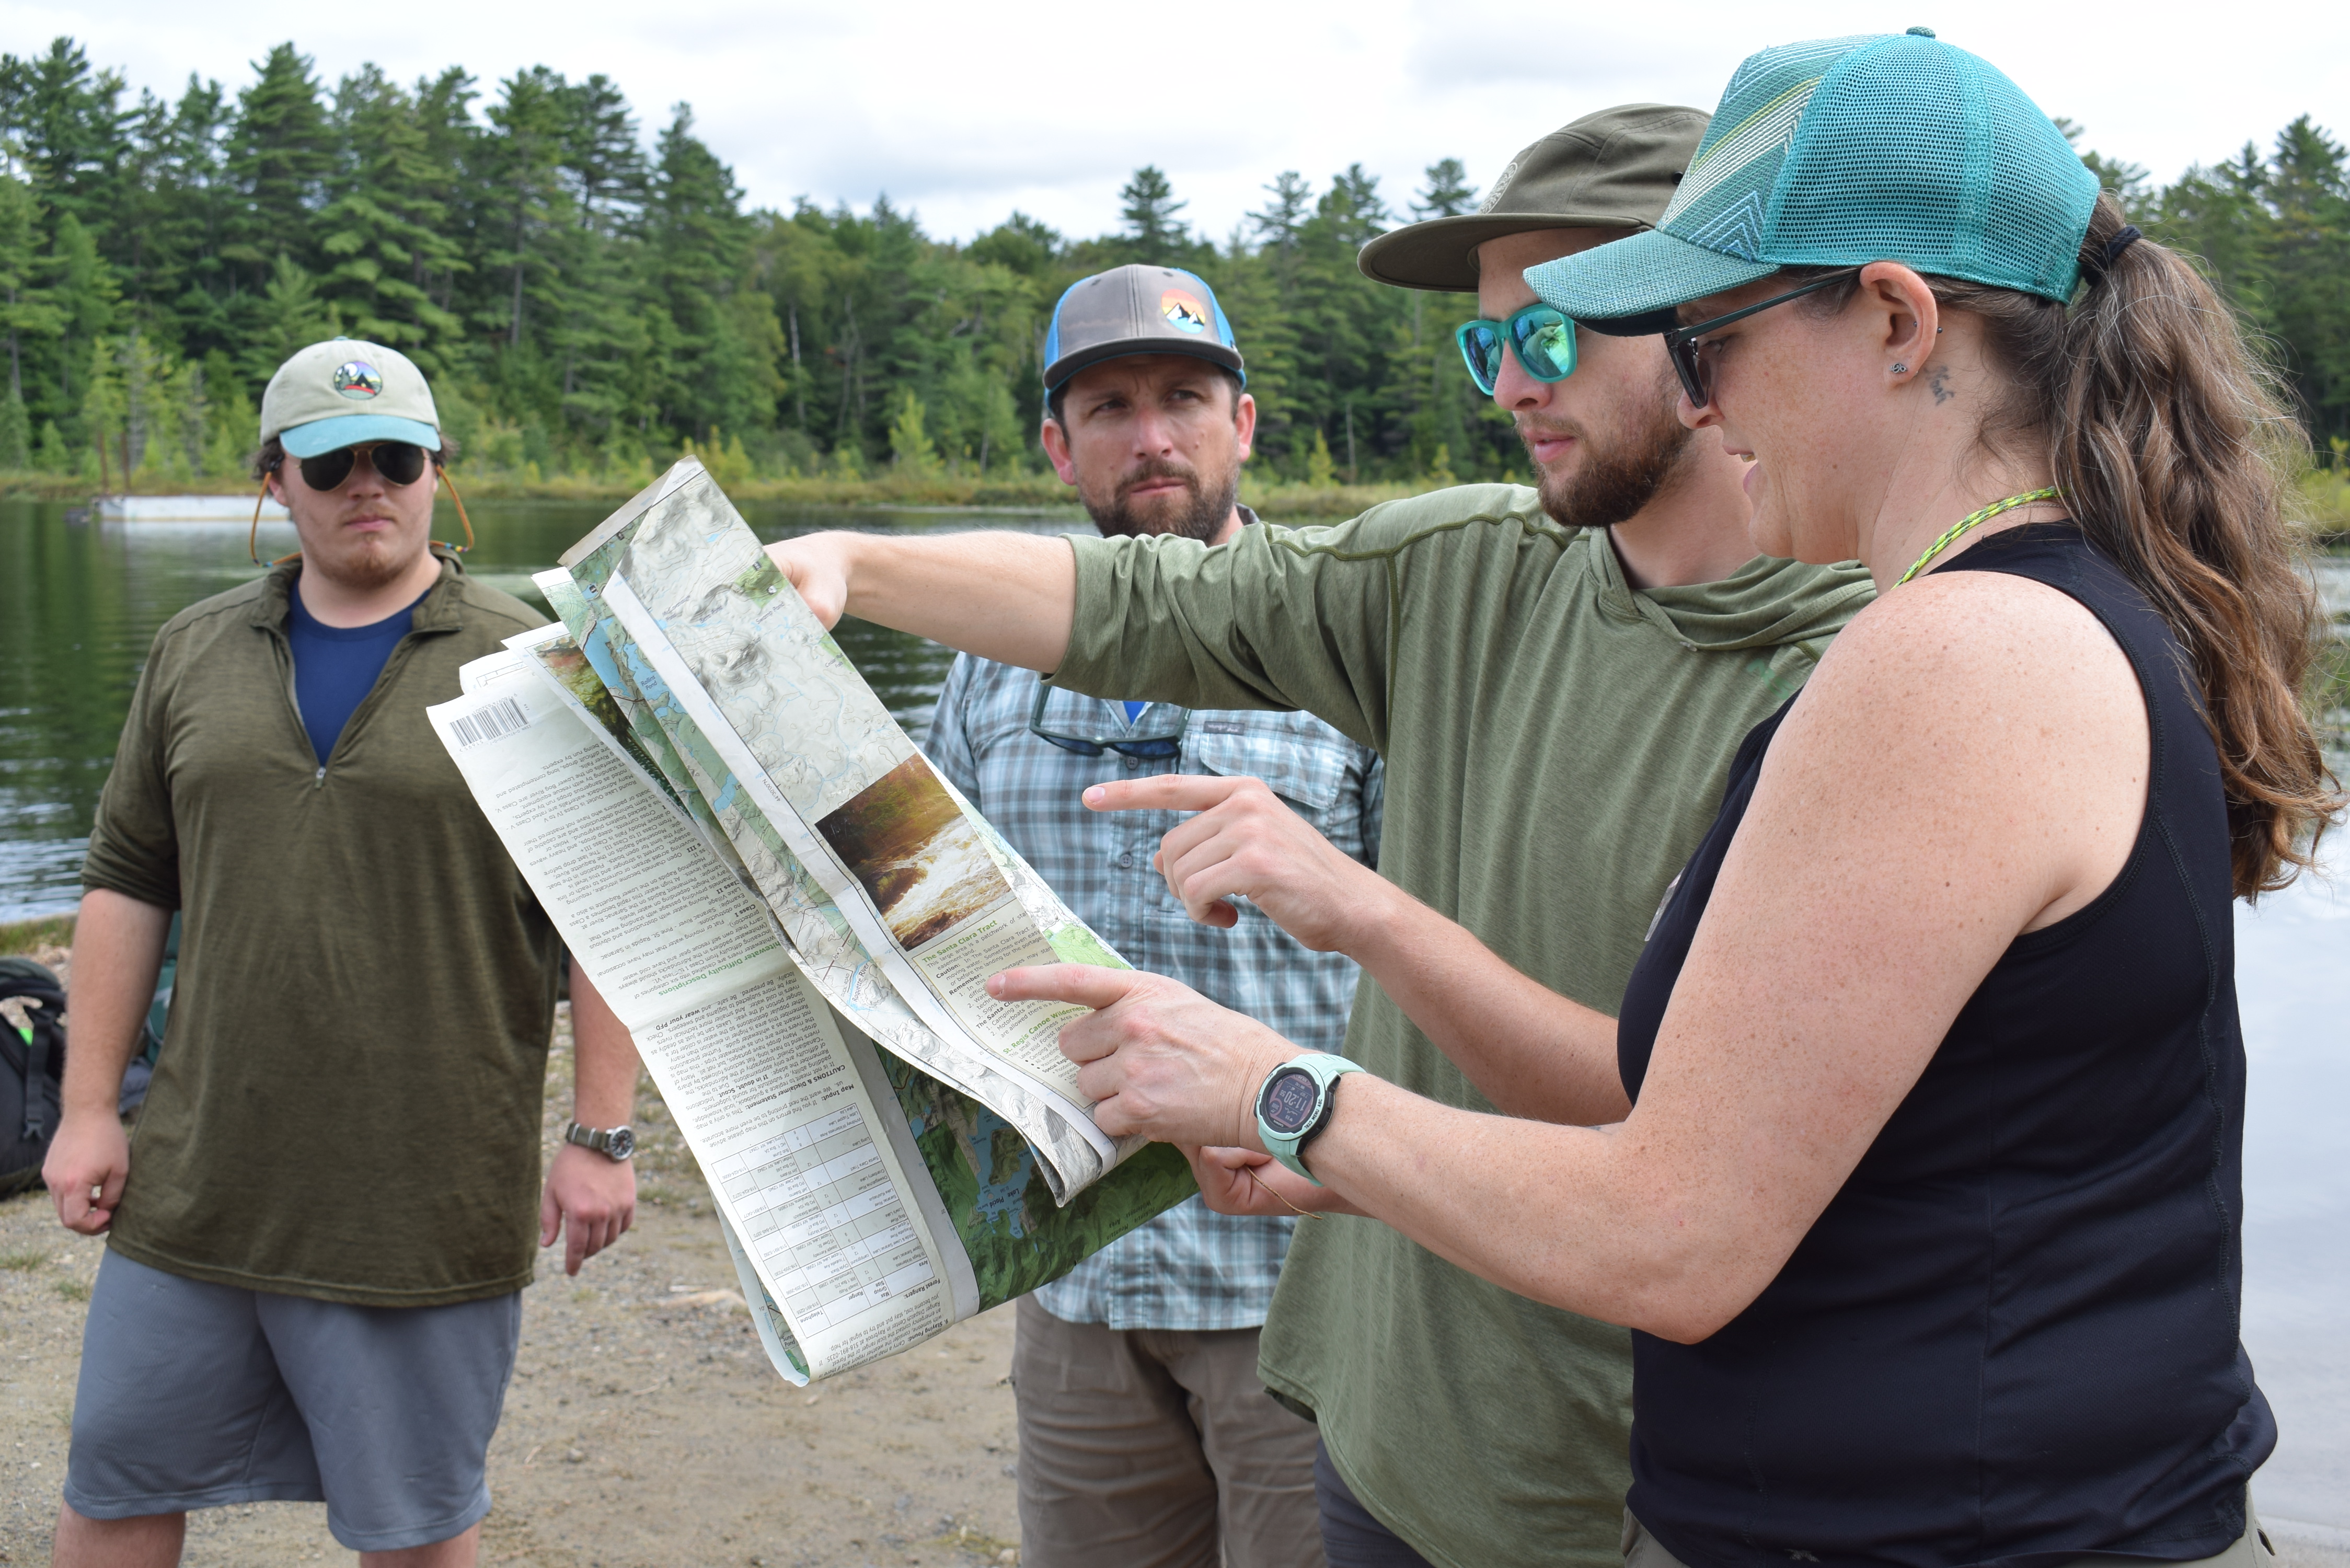 WRL students started their 24-day Adirondack expedition on Wednesday as they paddled out from Upper St. Regis Lake. 